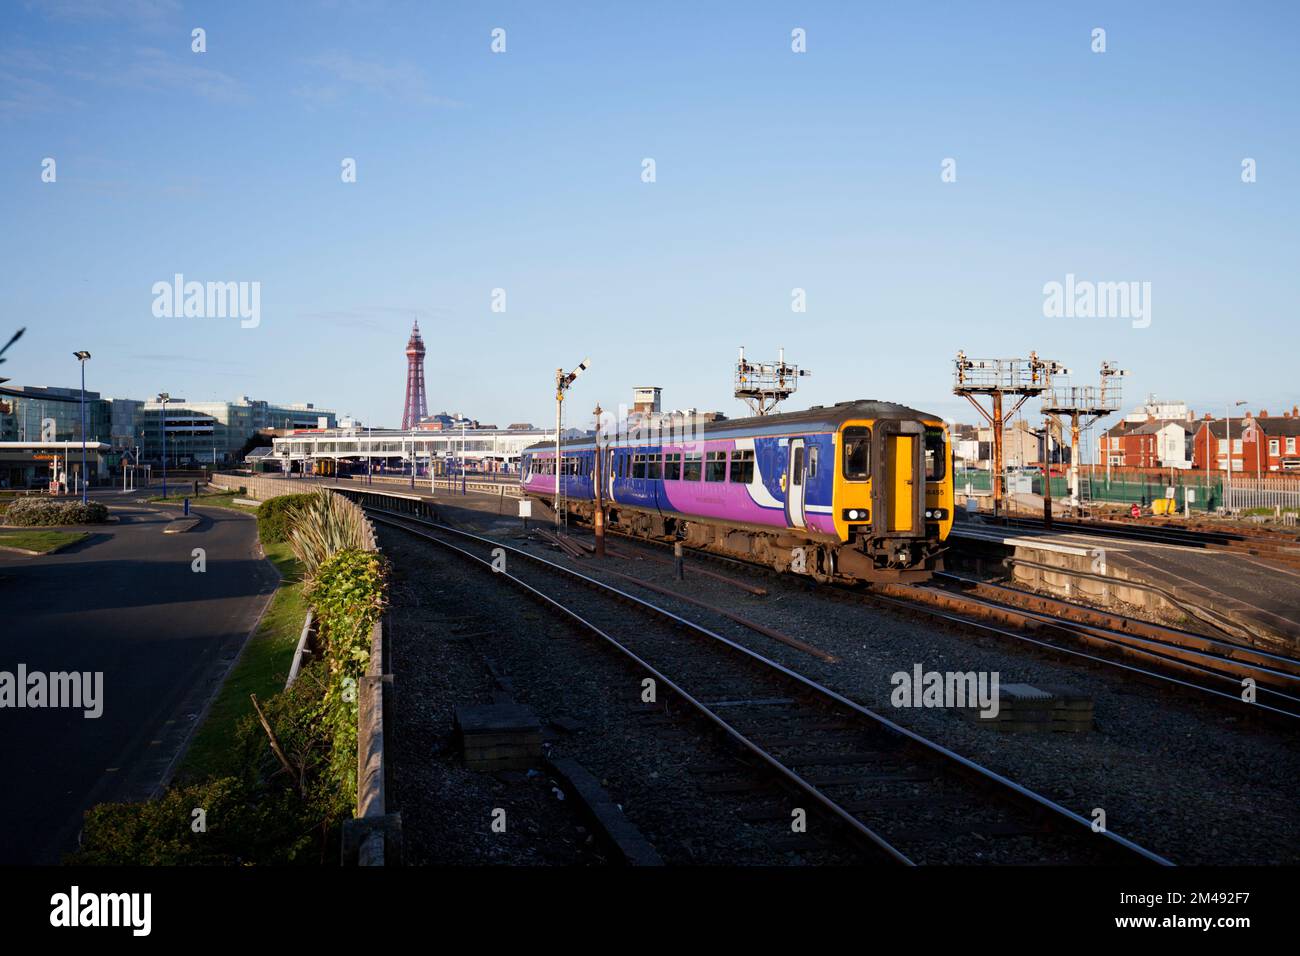 Northern Rail class 156 sprinter train departing from Blackpool North station with the bracket semaphore signals Stock Photo